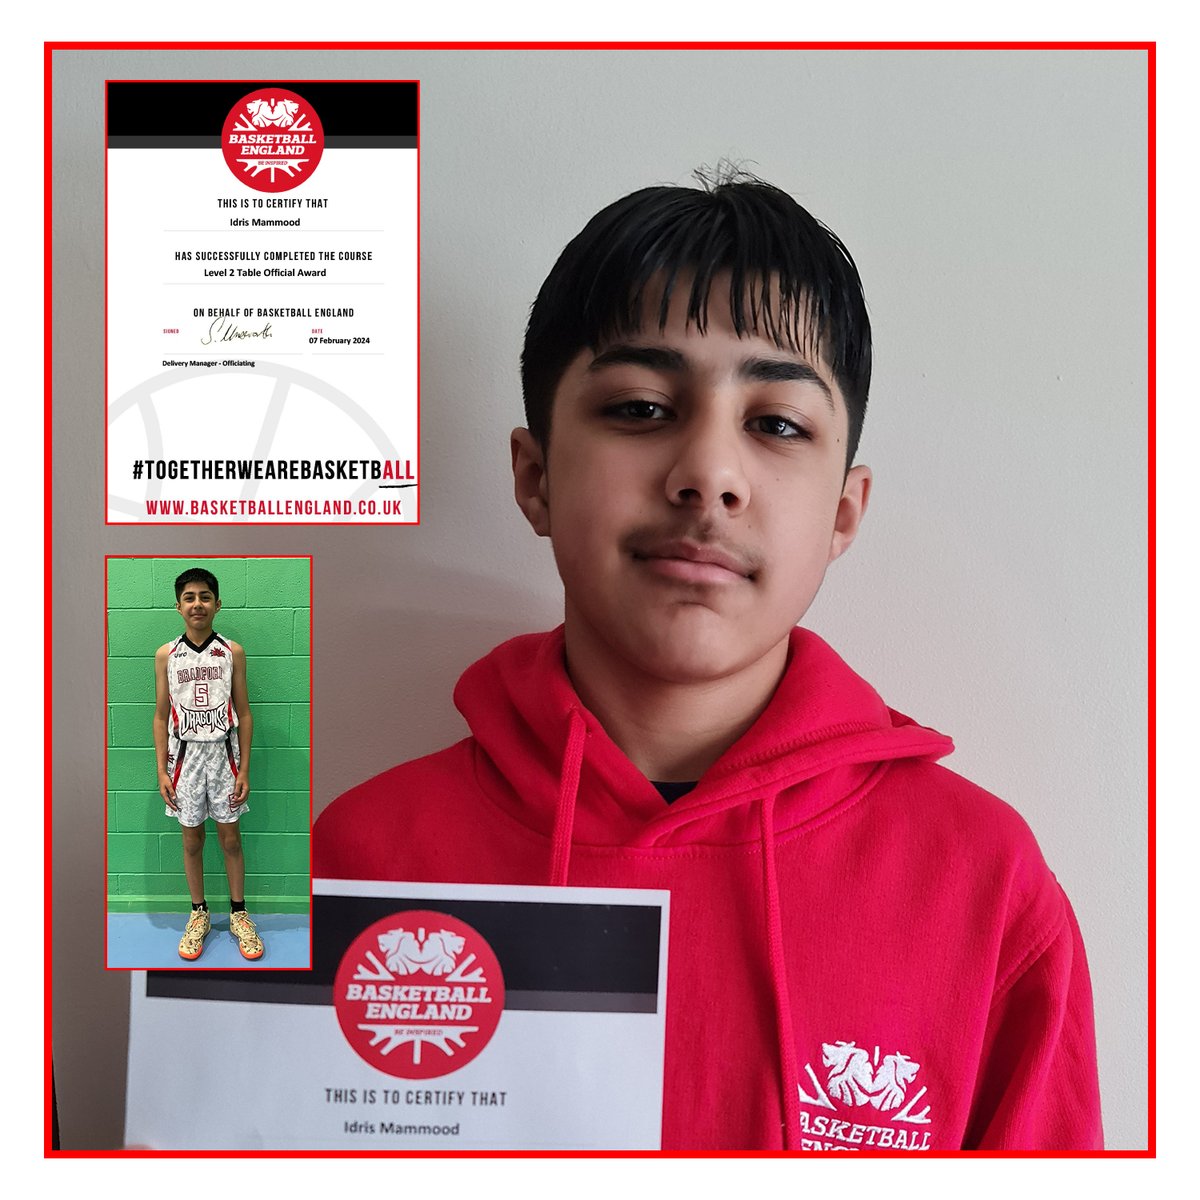 Congratulations to Idris Mahmood (Bradford Junior Dragons Under 14s Player) who has qualified as a Basketball England Level 2 Table Official. Well done Idris, keep up the great work and dedication. #BradfordJuniorDragons #Basketball #OneClubOneFamily #BEQualifications